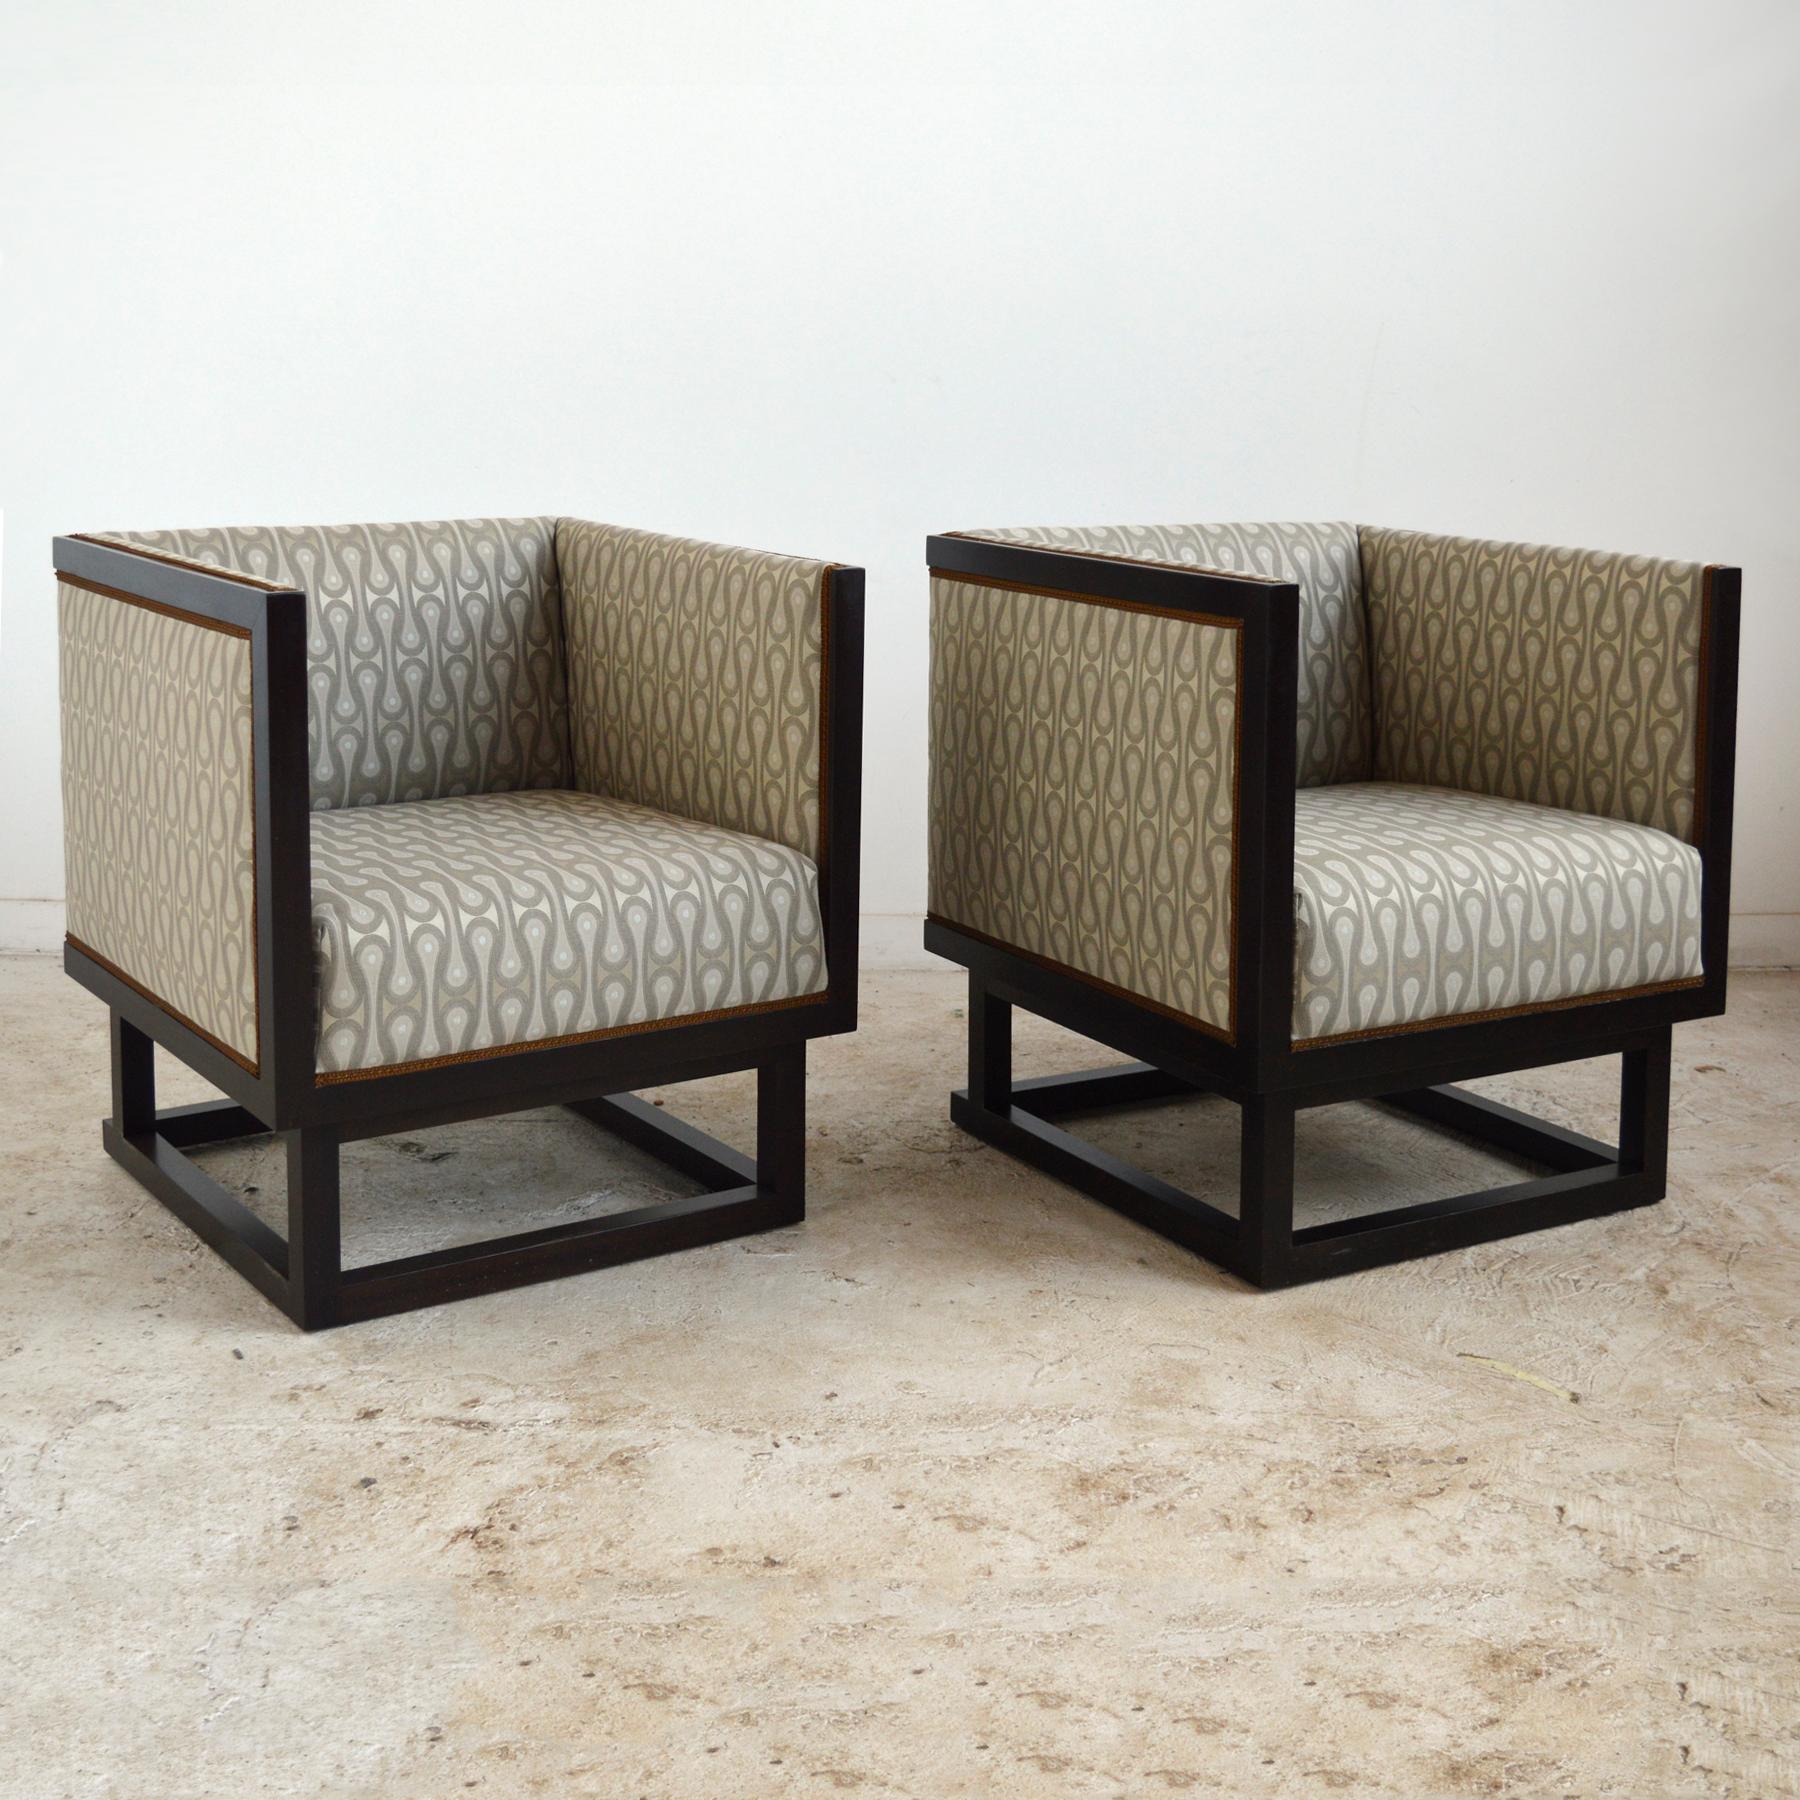 Designed in 1903, for the Vienna home of Dr. Salzer, Josef Hoffmann's cabinet chairs are a timeless design that typifies his Wiener Werkstätte aesthetic. The rationalist cube form is made comfortable with the upholstered interior that's covered in